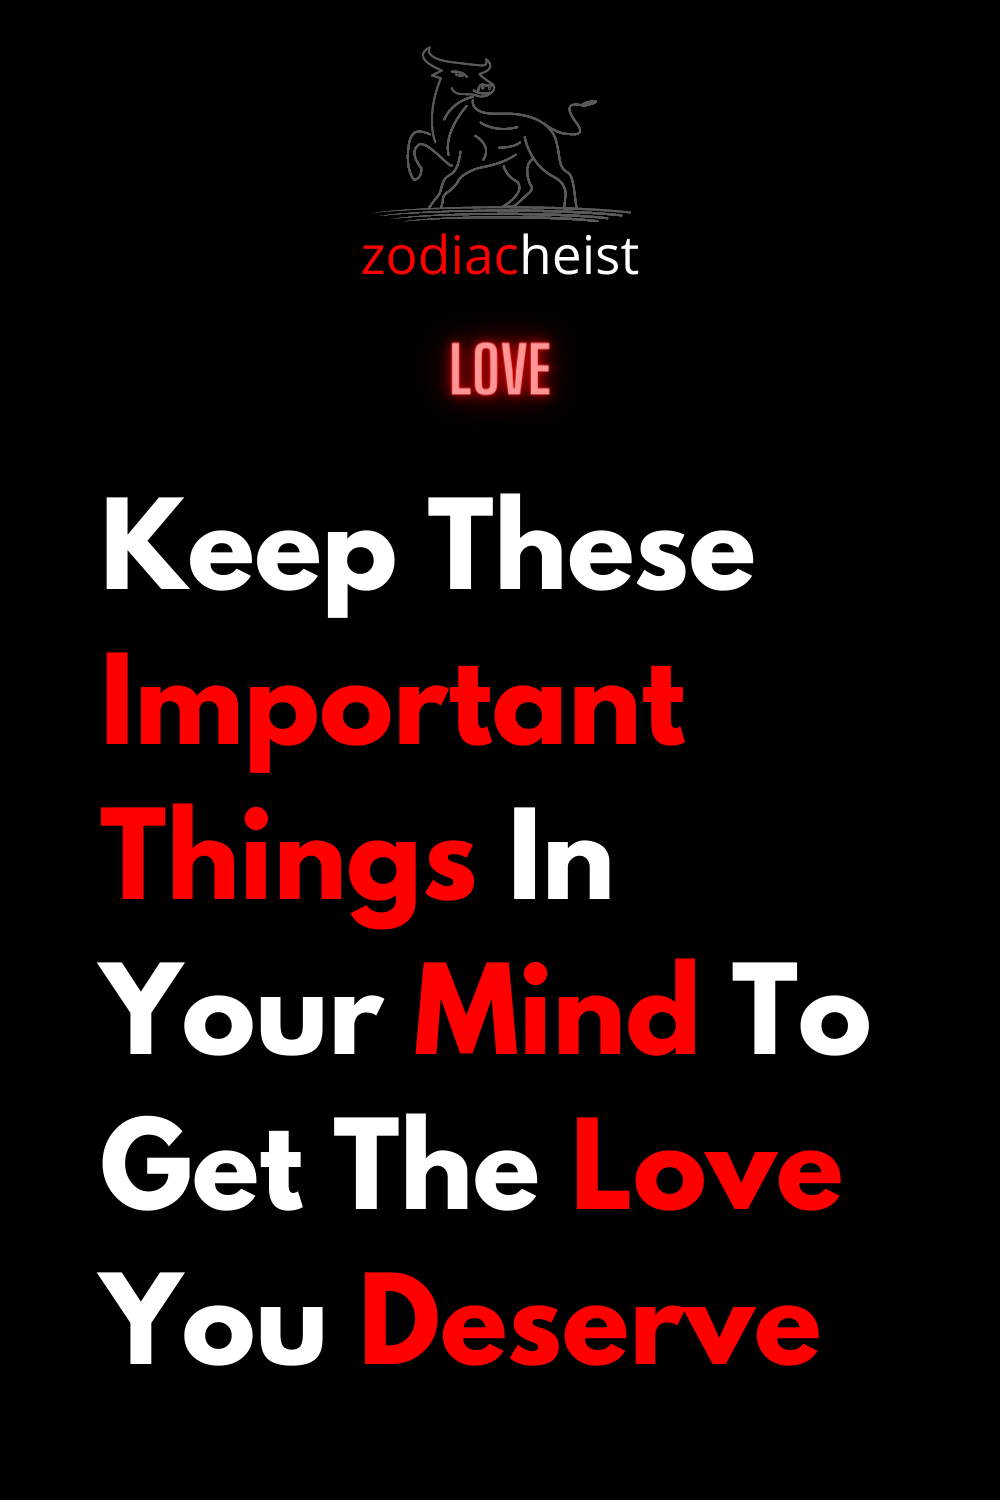 Keep These Important Things In Your Mind To Get The Love You Deserve